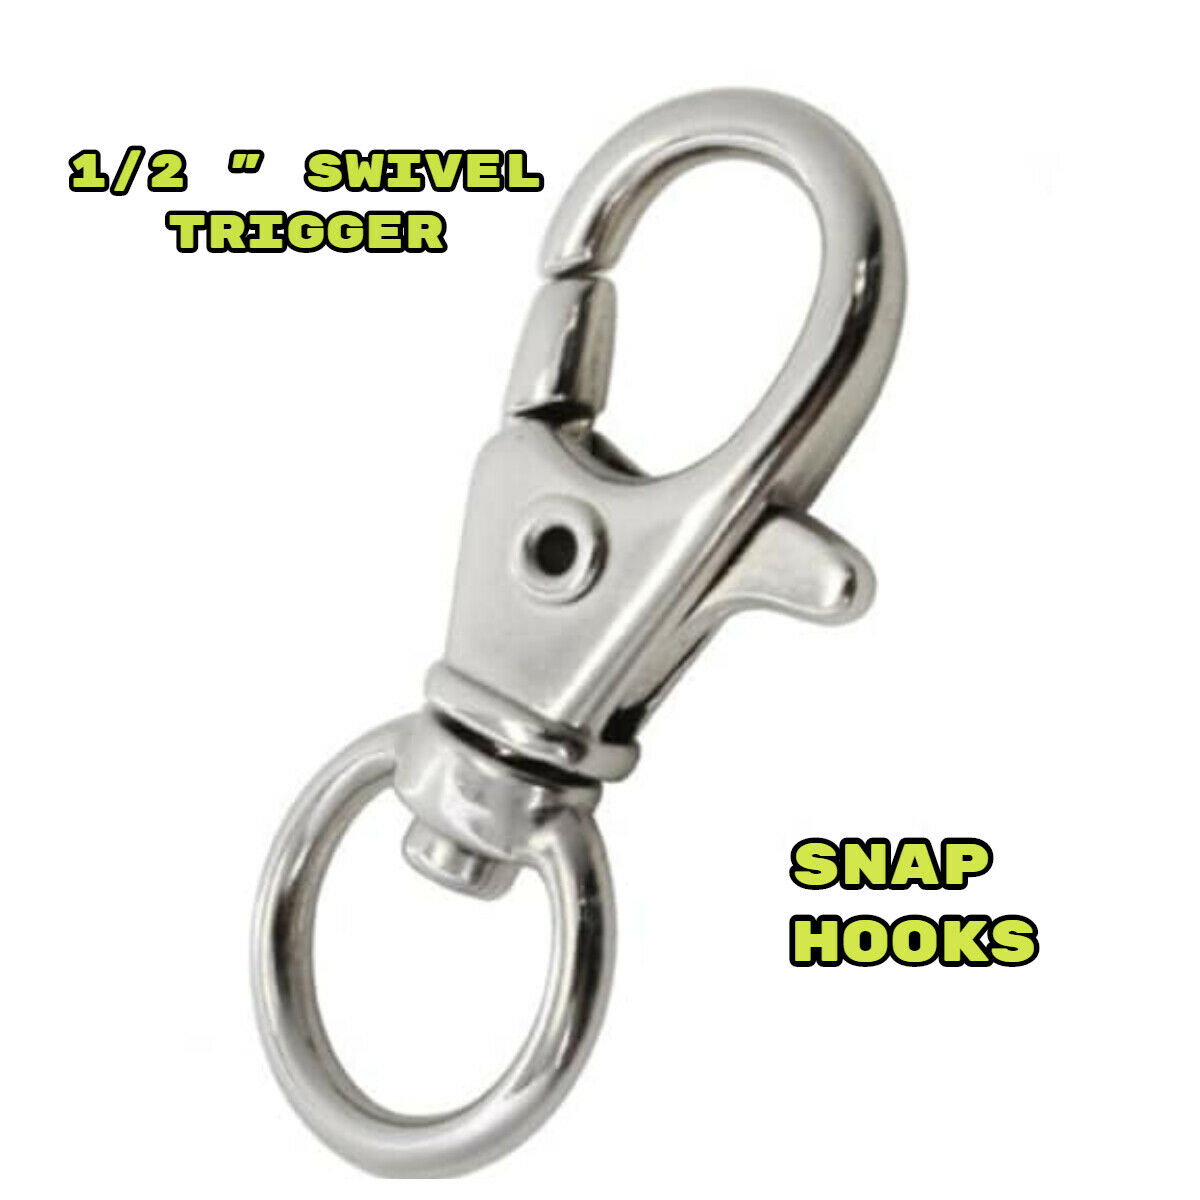 Paracord Planet 1/2 Inch Swivel Trigger Snap Hooks For Paracord, Keychain, Bags